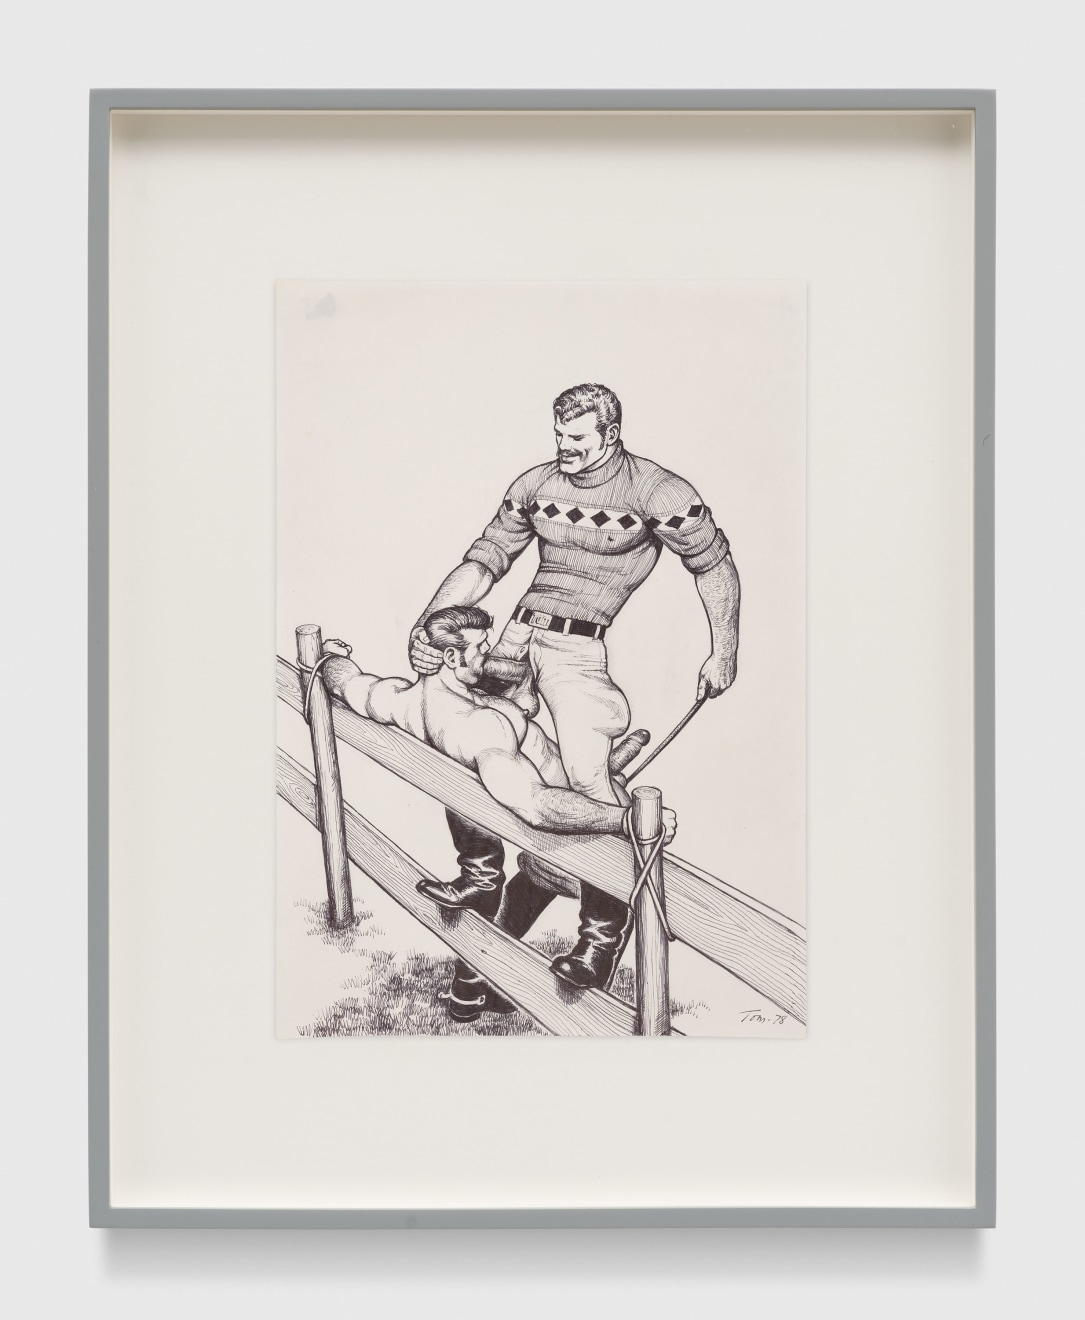 Tom of Finland, Untitled (from Kake vol. 21 - &quot;Greasy Rider&quot;), 1978